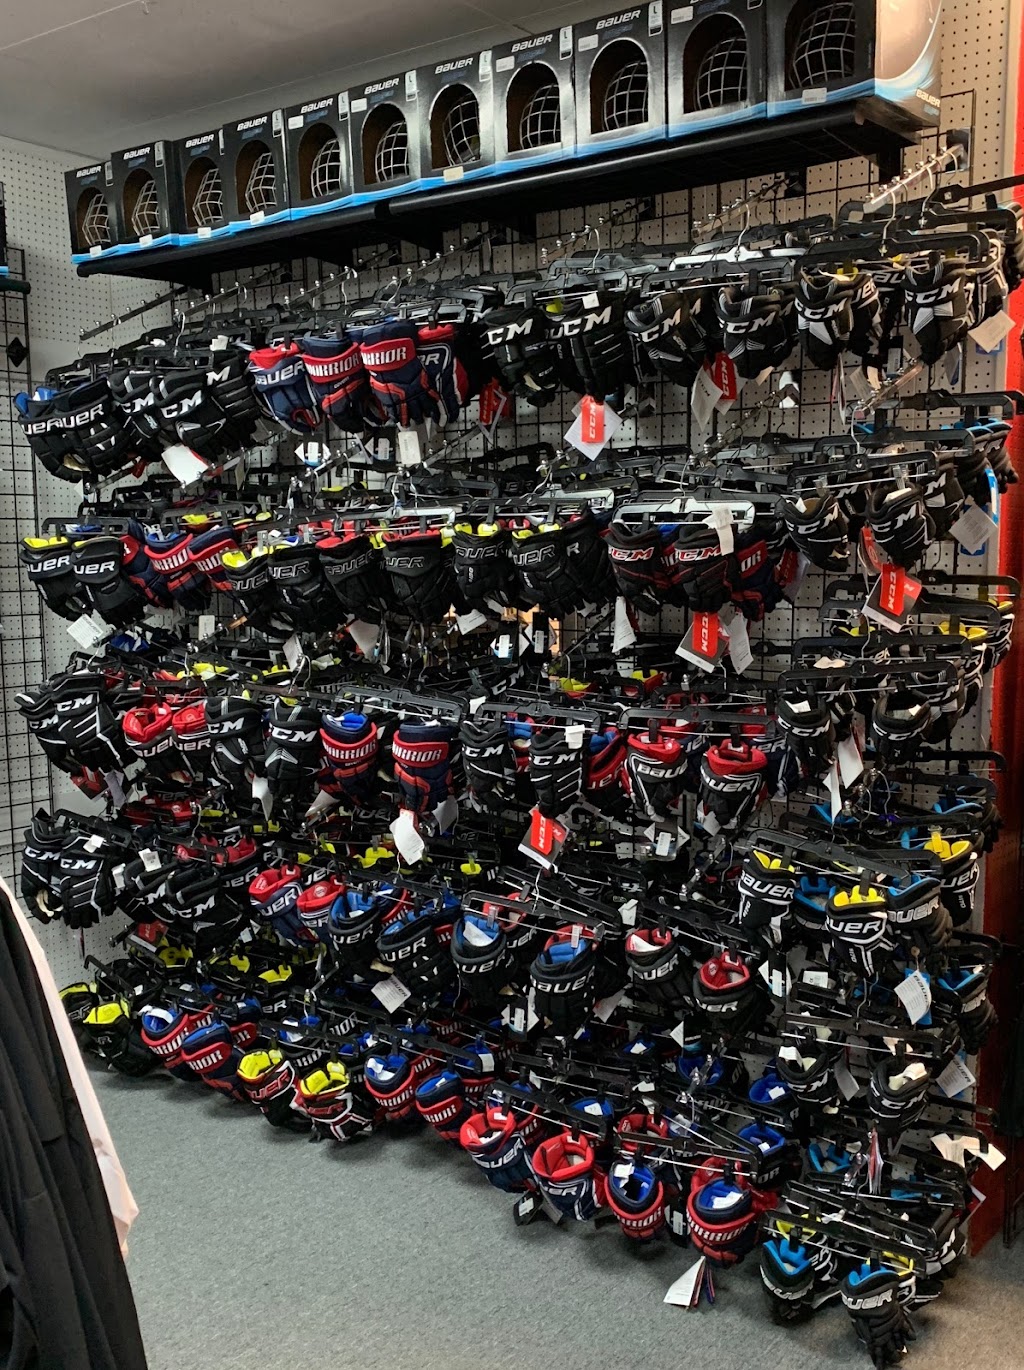 R&M Hockey Supply | 601 Holly Dell Dr, Sewell, NJ 08080 | Phone: (856) 589-7000